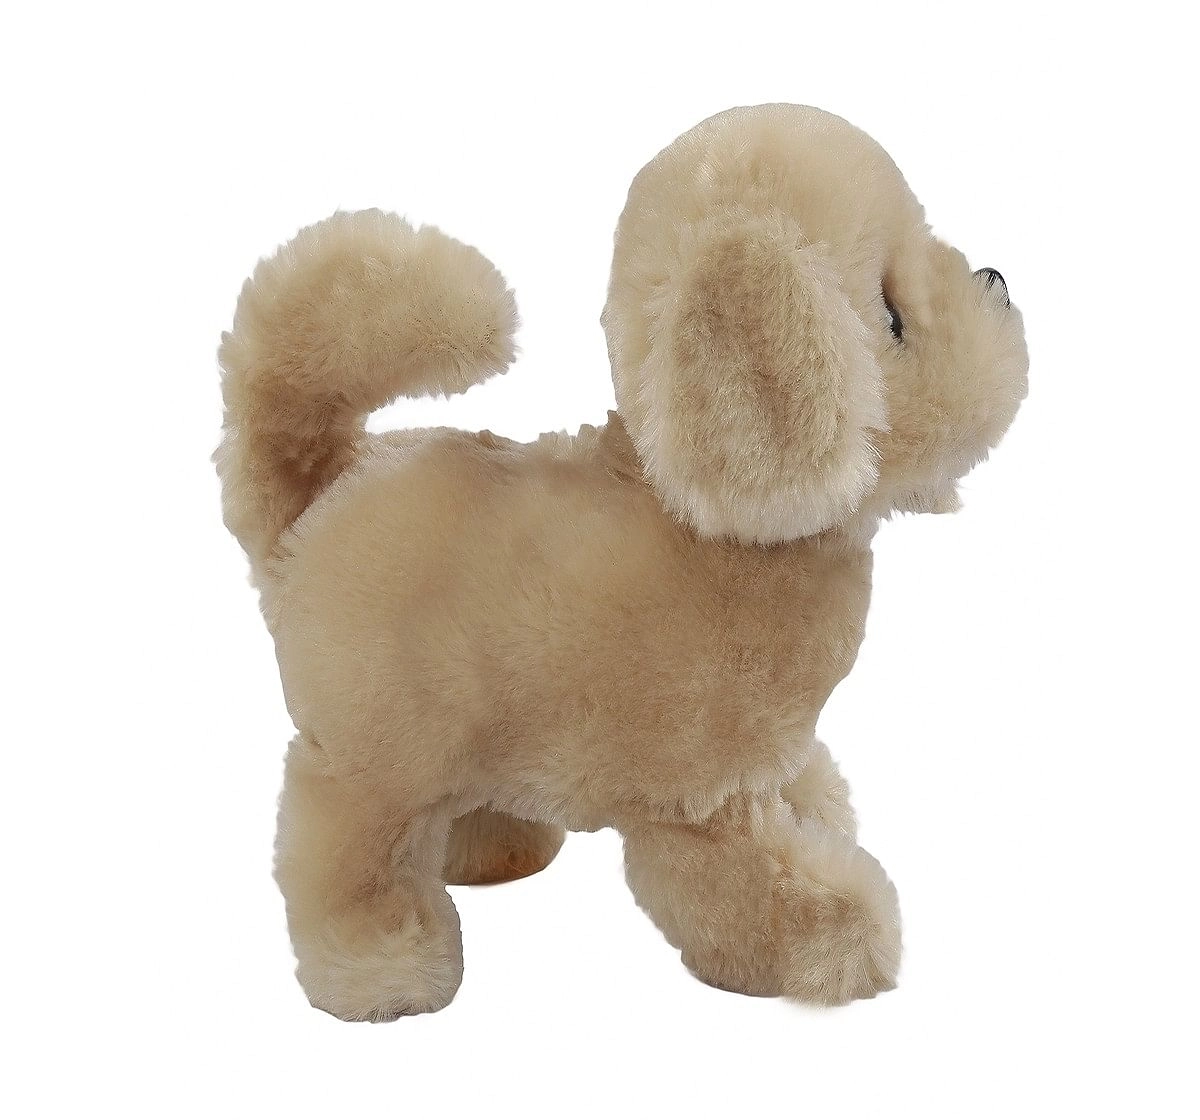 Hamleys Movers & Shakers Retriever Plush Soft Dog Toy(Brown), 3Y+